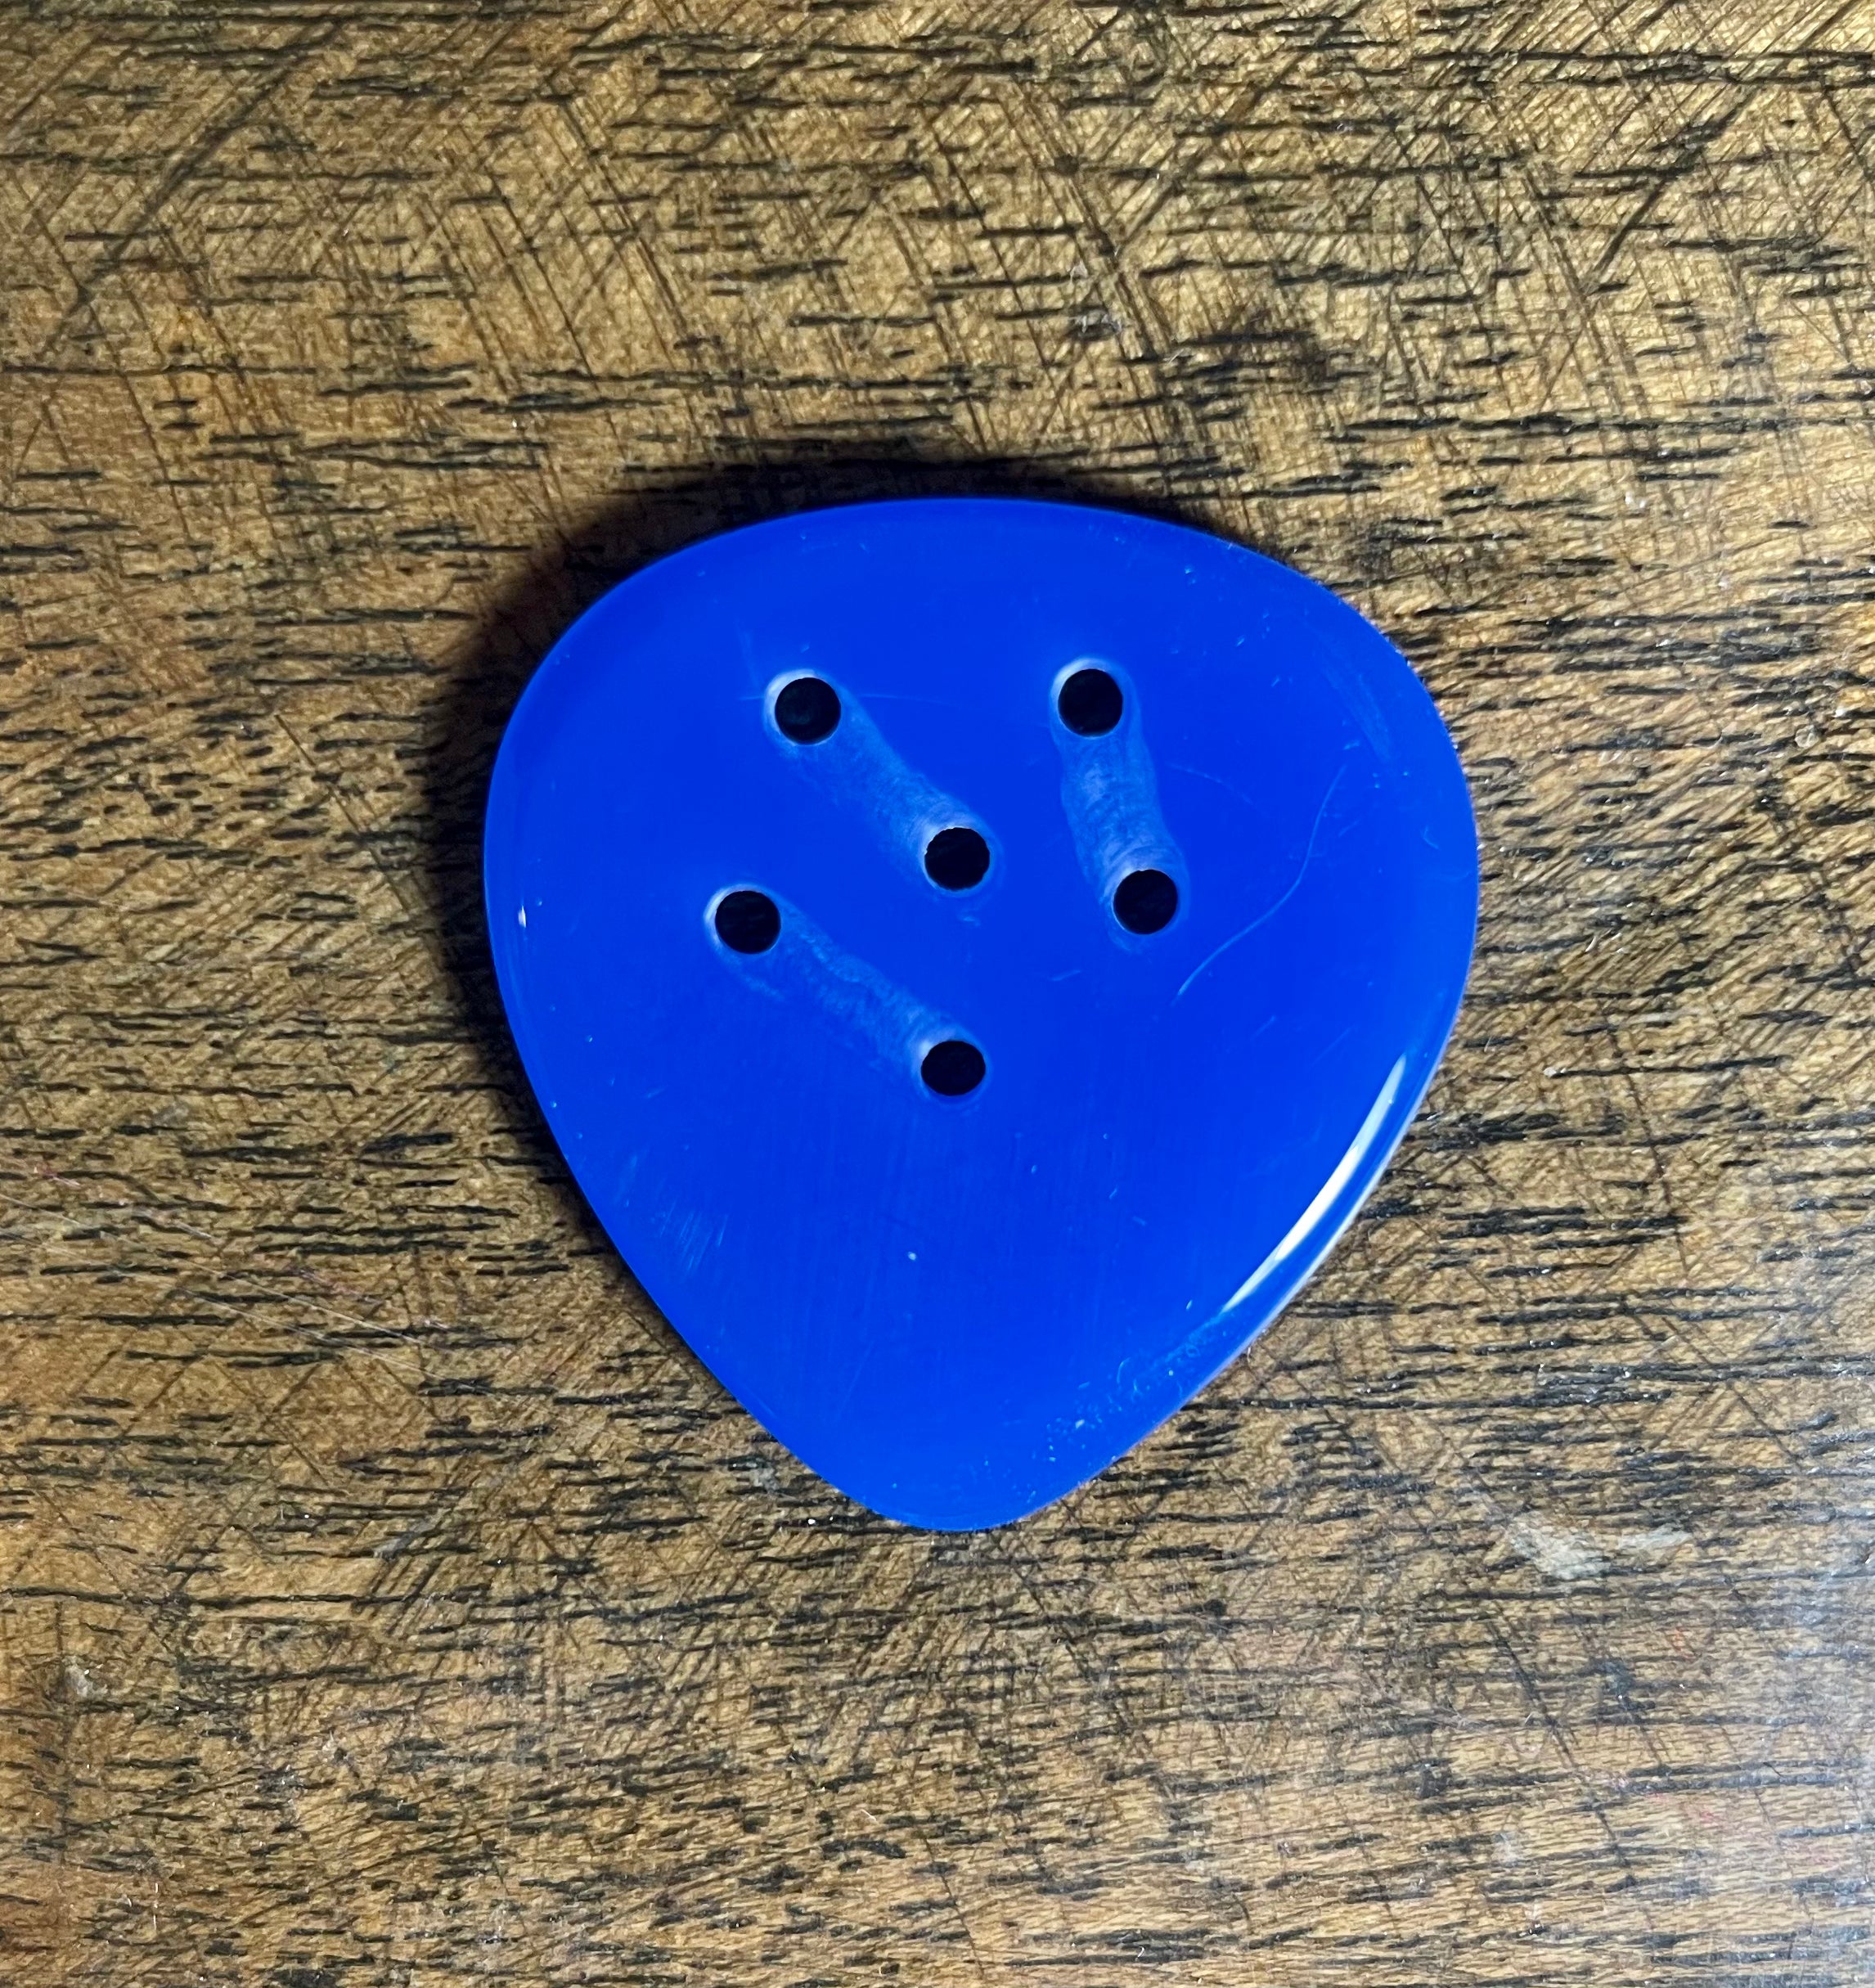 Manouche Pick - Rhythm and Solo Ivorin Pick (This item has free delivery with orders over $55)